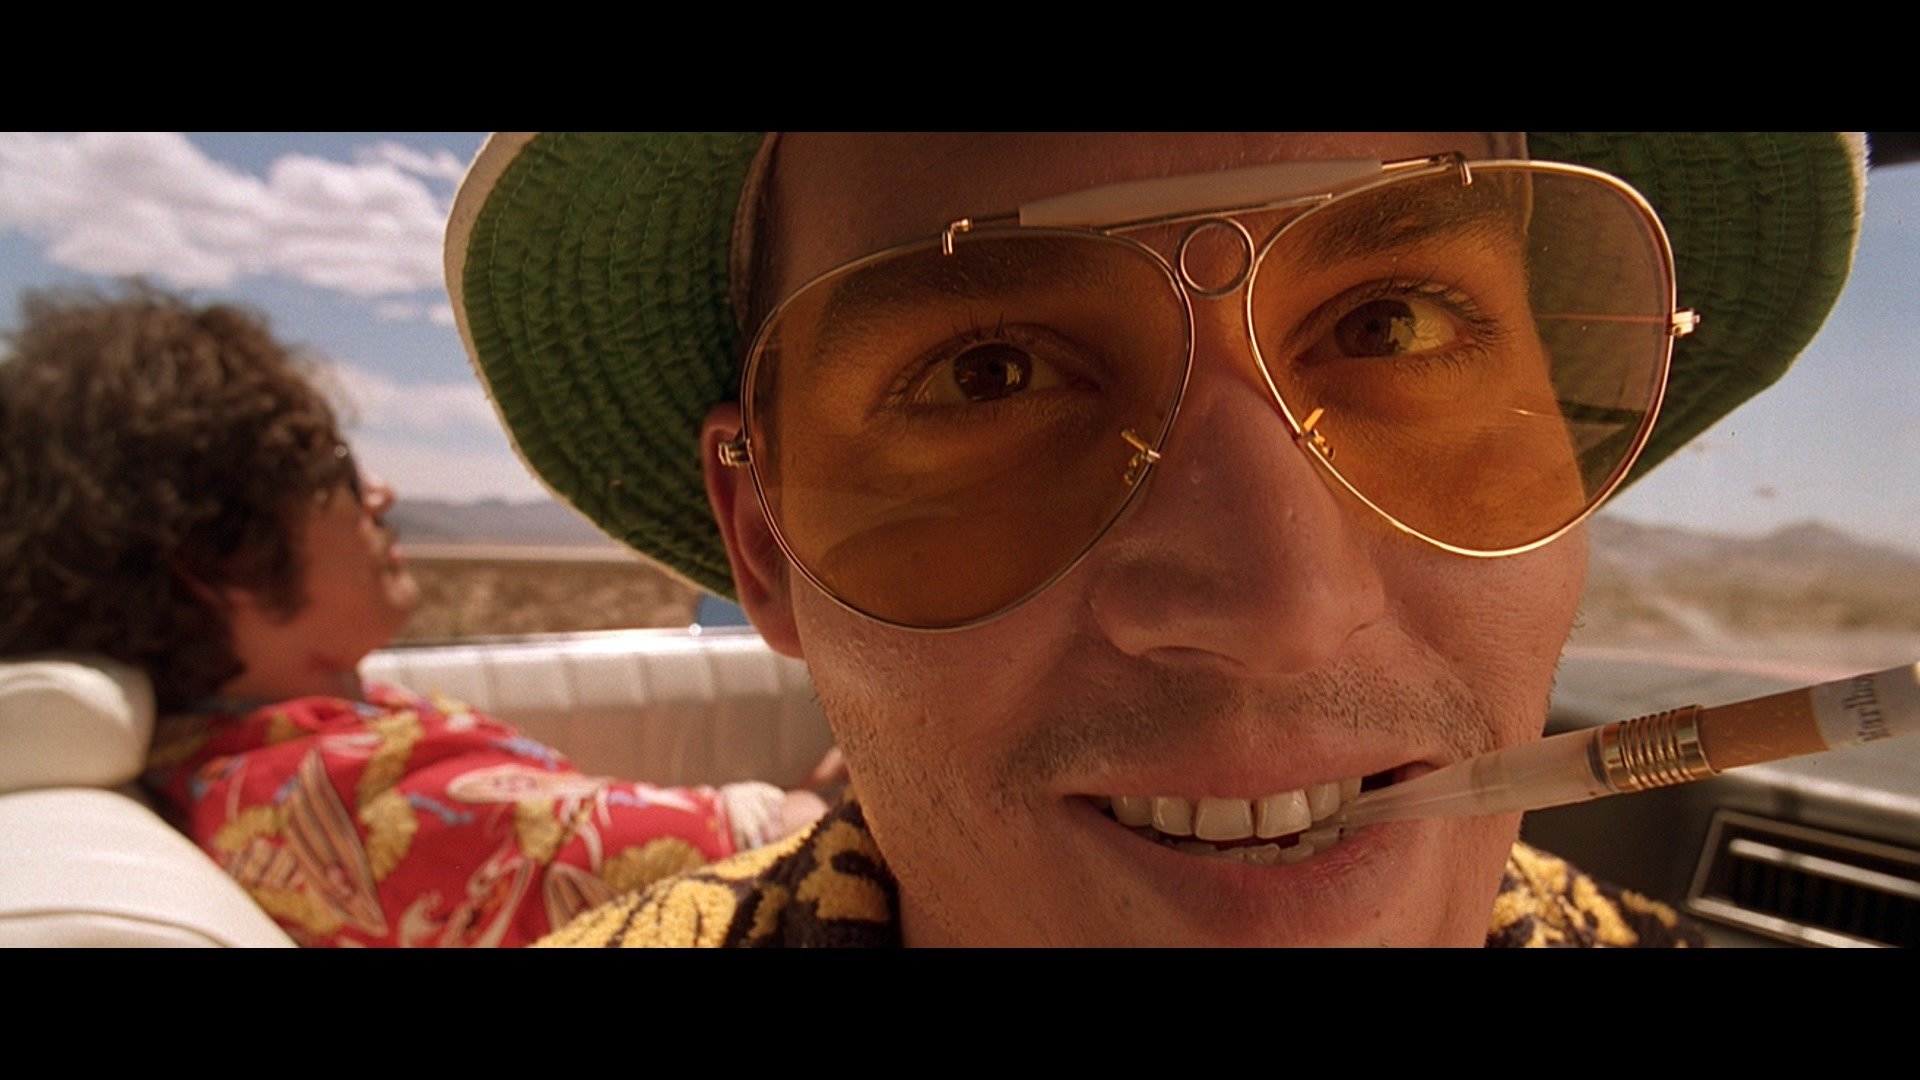 Best Fear And Loathing In Las Vegas wallpaper ID:86639 for High Resolution full hd computer